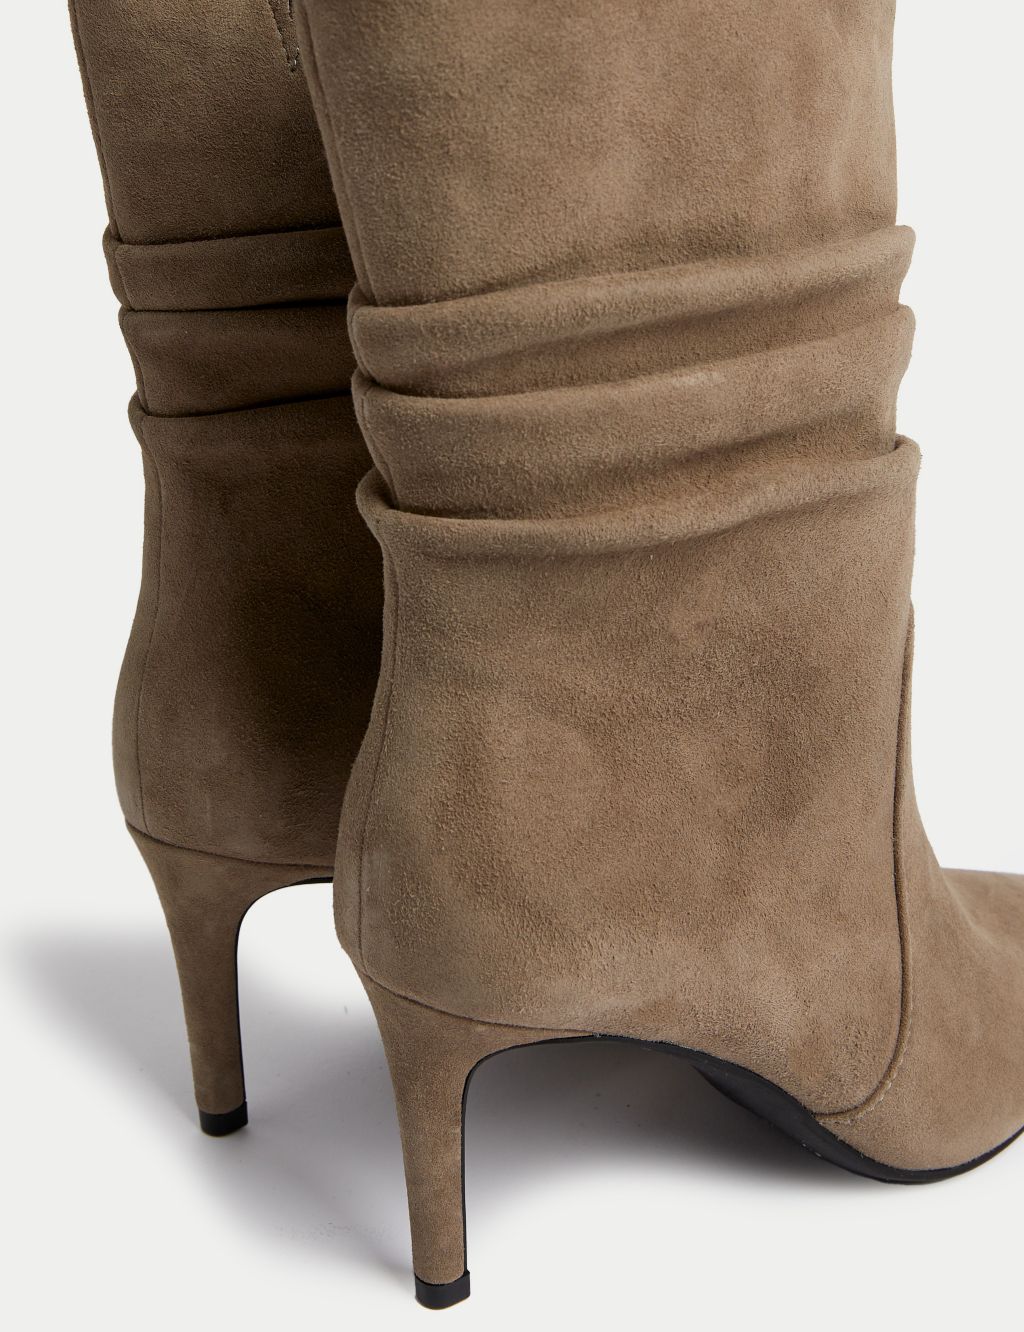 Suede Stiletto Heel Pointed Ankle Boots image 3